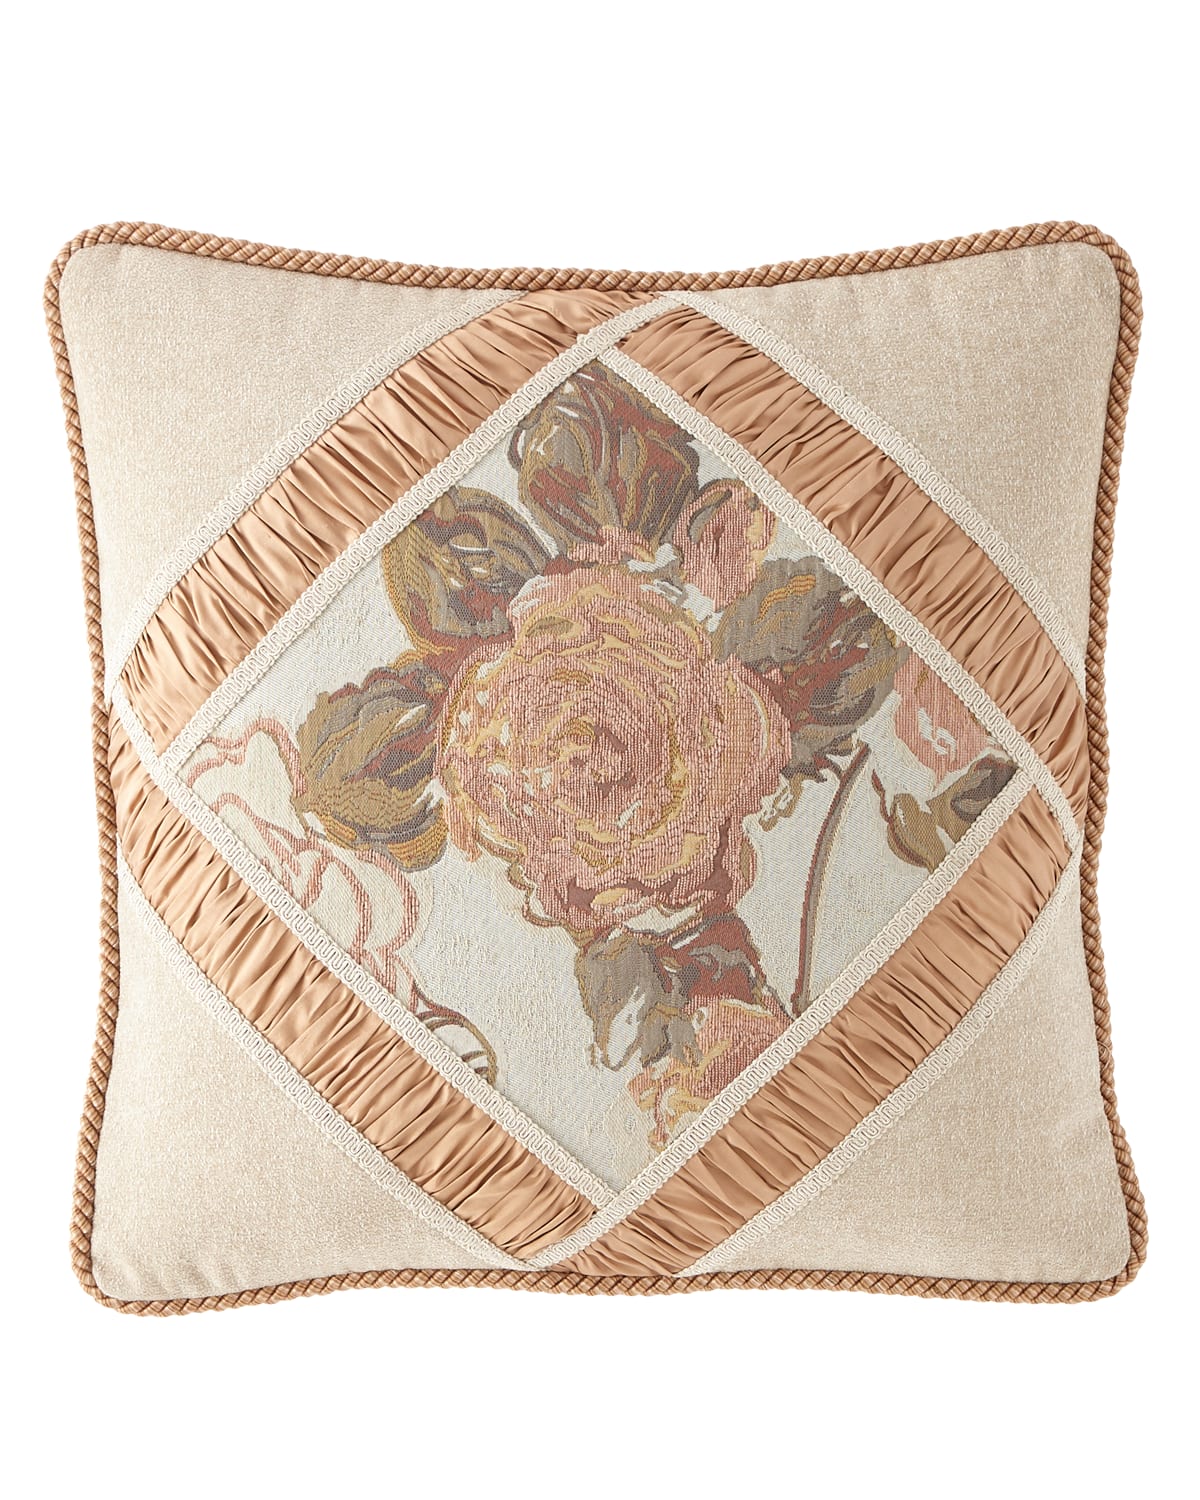 Image Austin Horn Collection Beauty Framed Pillow